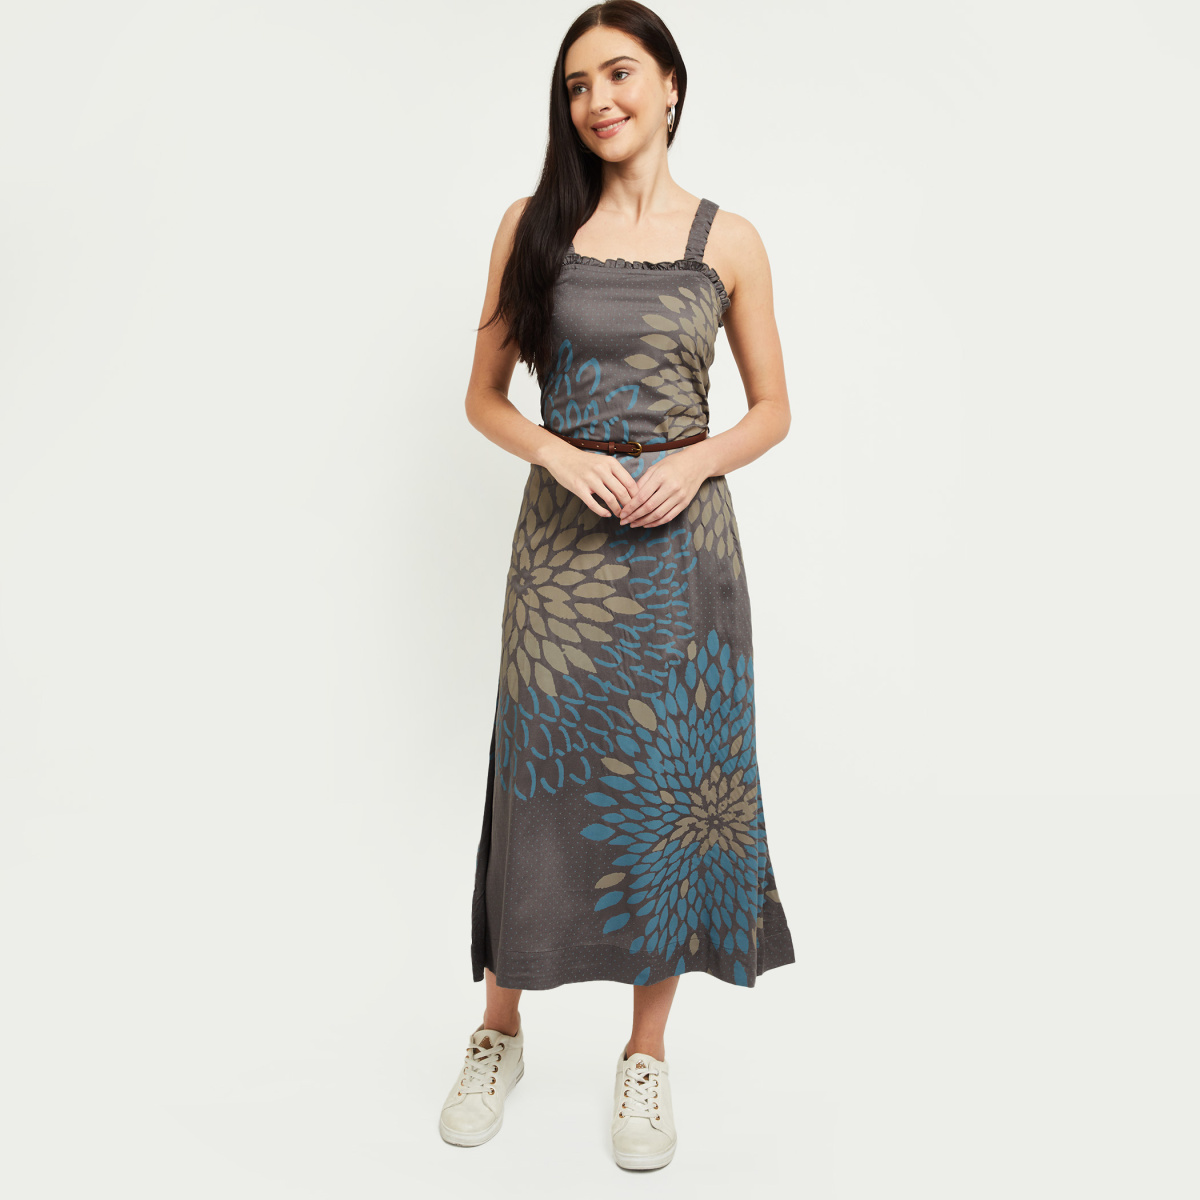 Buy Max Women's Cotton A-Line Midi Dress (DTI2504IMG_Blue_XS) at Amazon.in